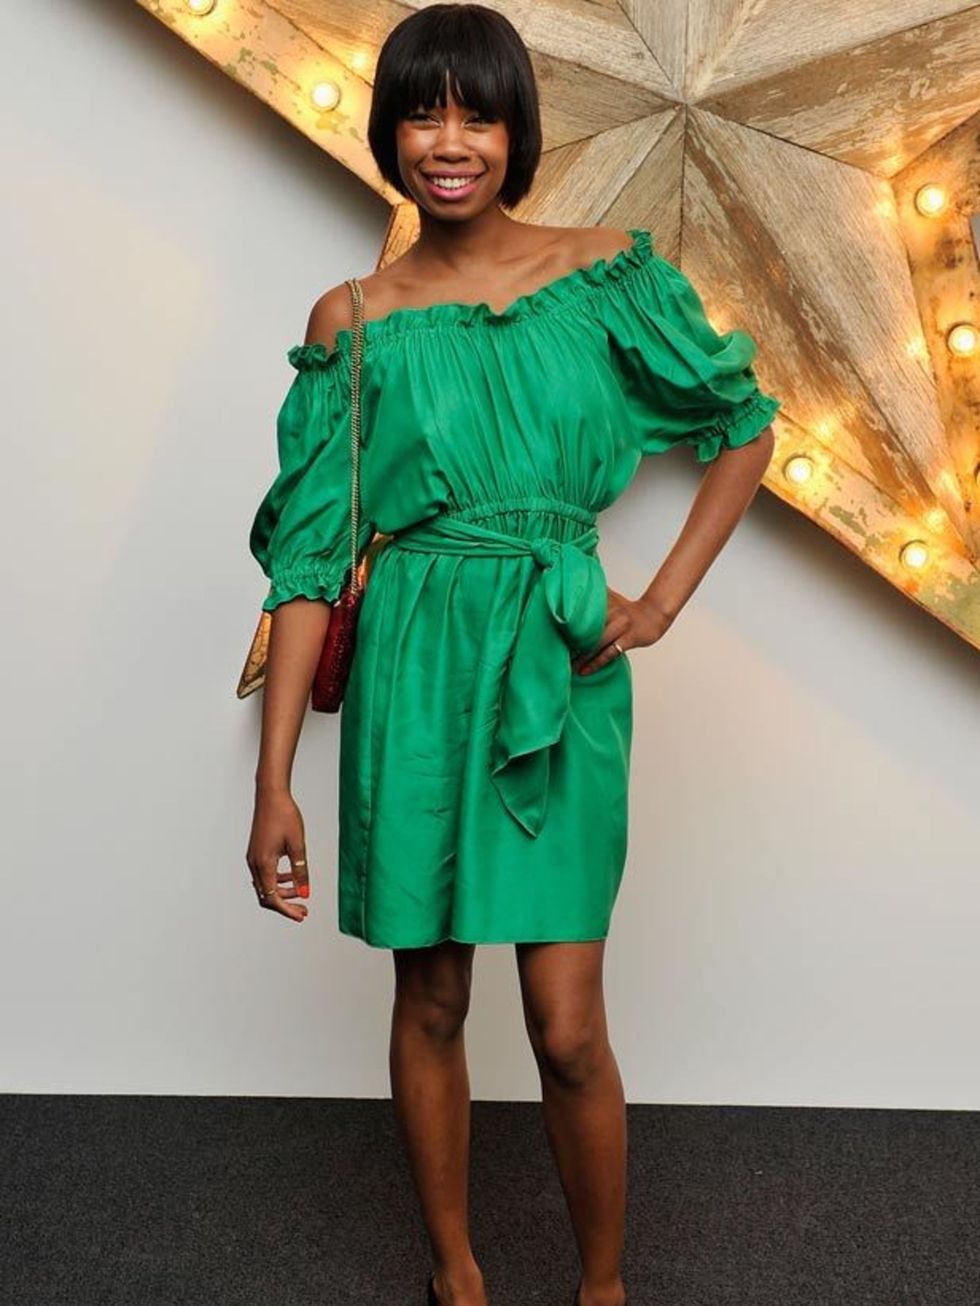 <p><a href="http://www.elleuk.com/content/search?SearchText=tolulah+adeyemi&amp;SearchButton=Search">Tolulah Adeyemi</a> opted for this seasons hot-trend, brights, for the Net-a-Porter Party for Dolce &amp; Gabbana, 14 July 2011</p>